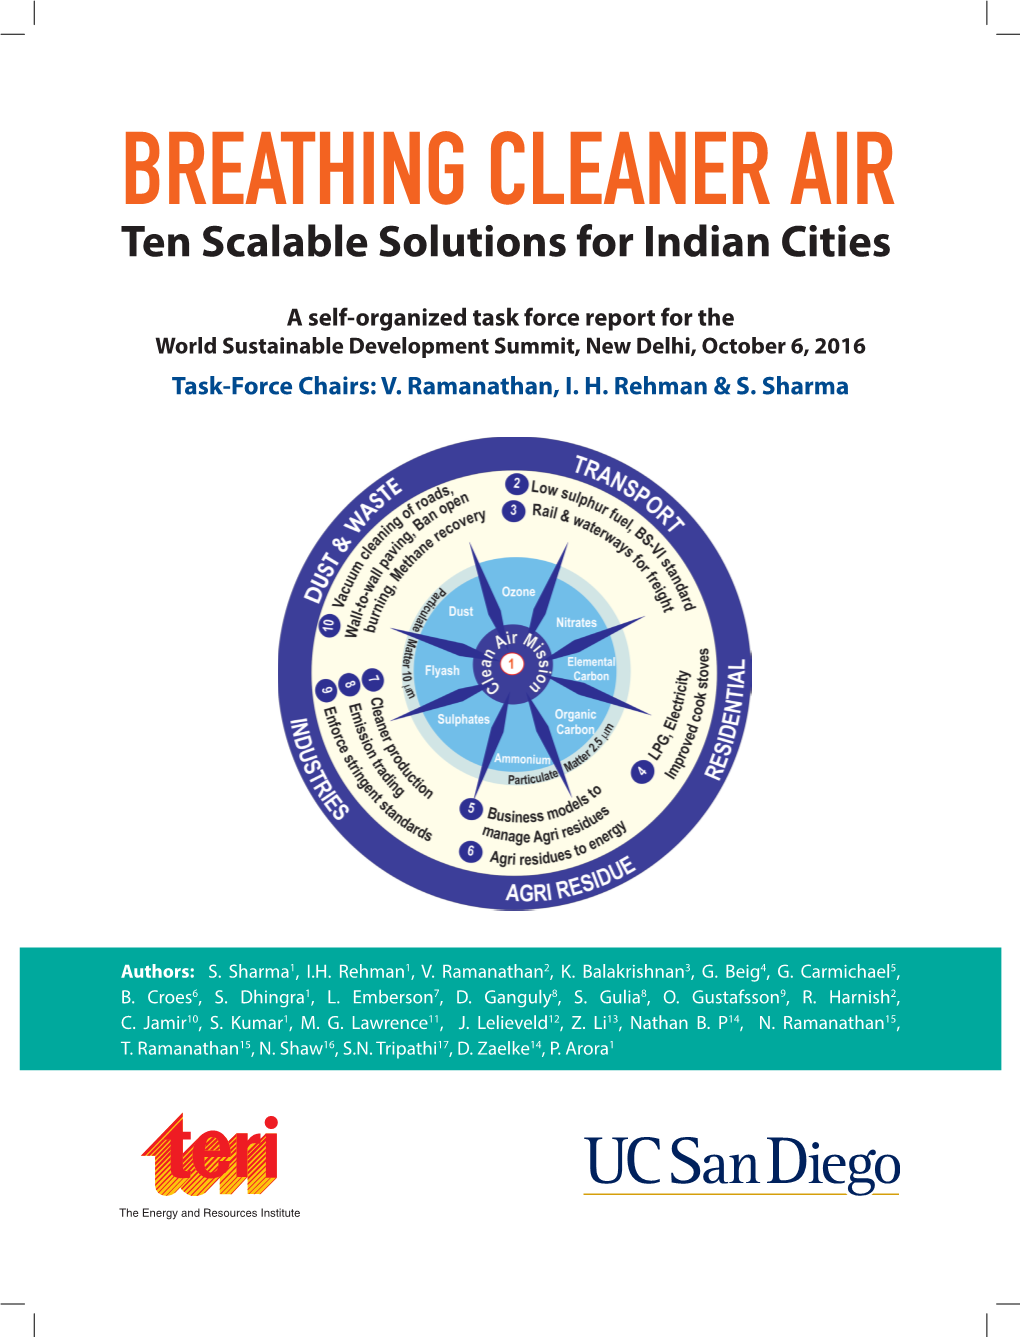 Report: Breathing Cleaner Air – Ten Scalable Solutions for Indian Cities